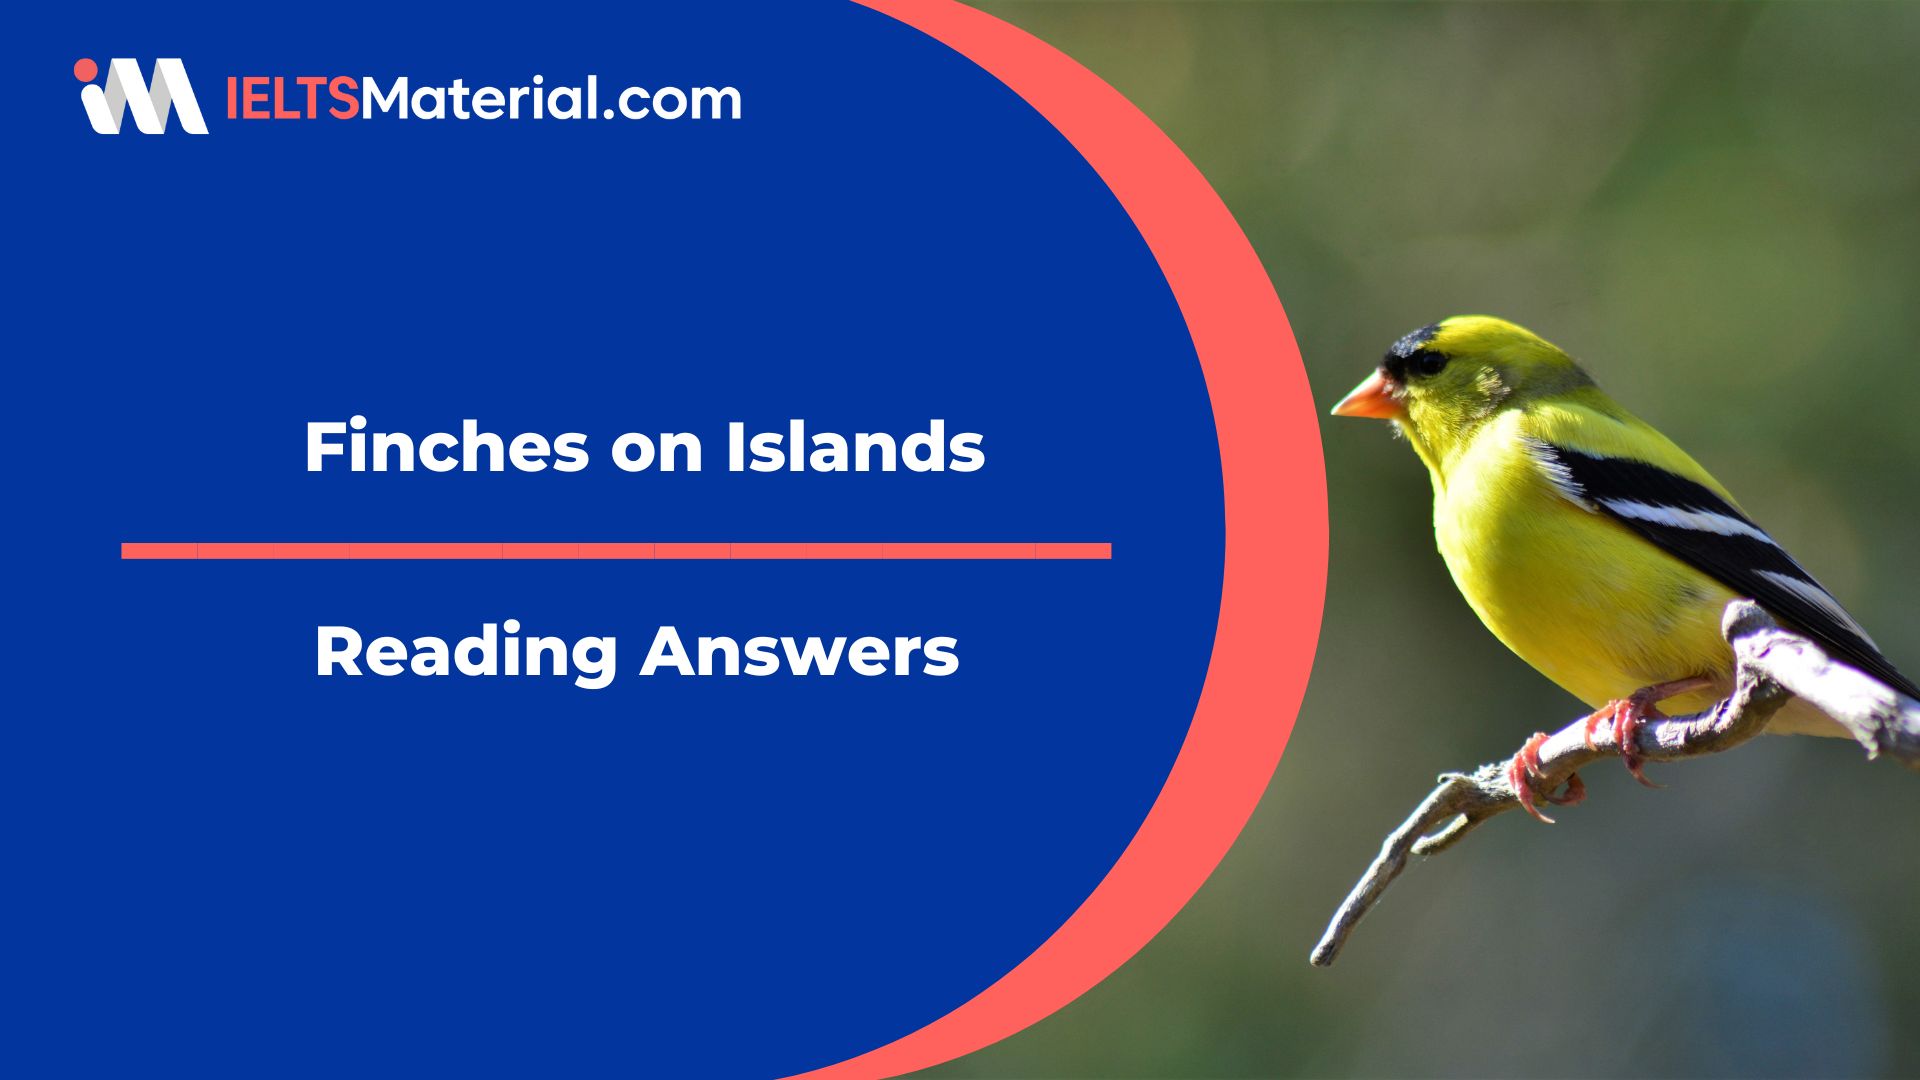 Finches on Islands Reading Answers